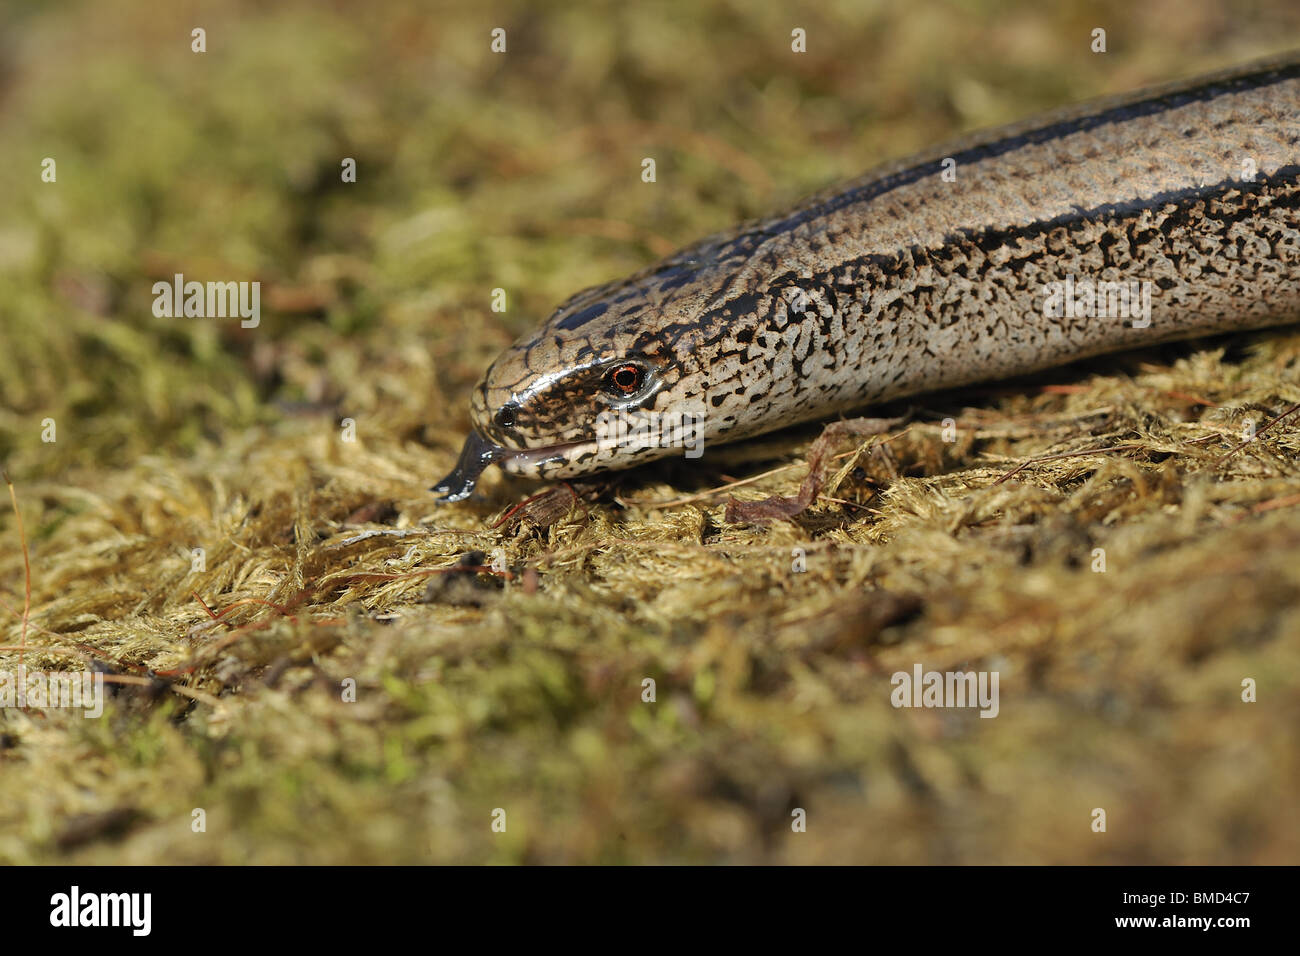 Female slow worm (Anguis fragilis) smelling with its tongue - head detail Stock Photo